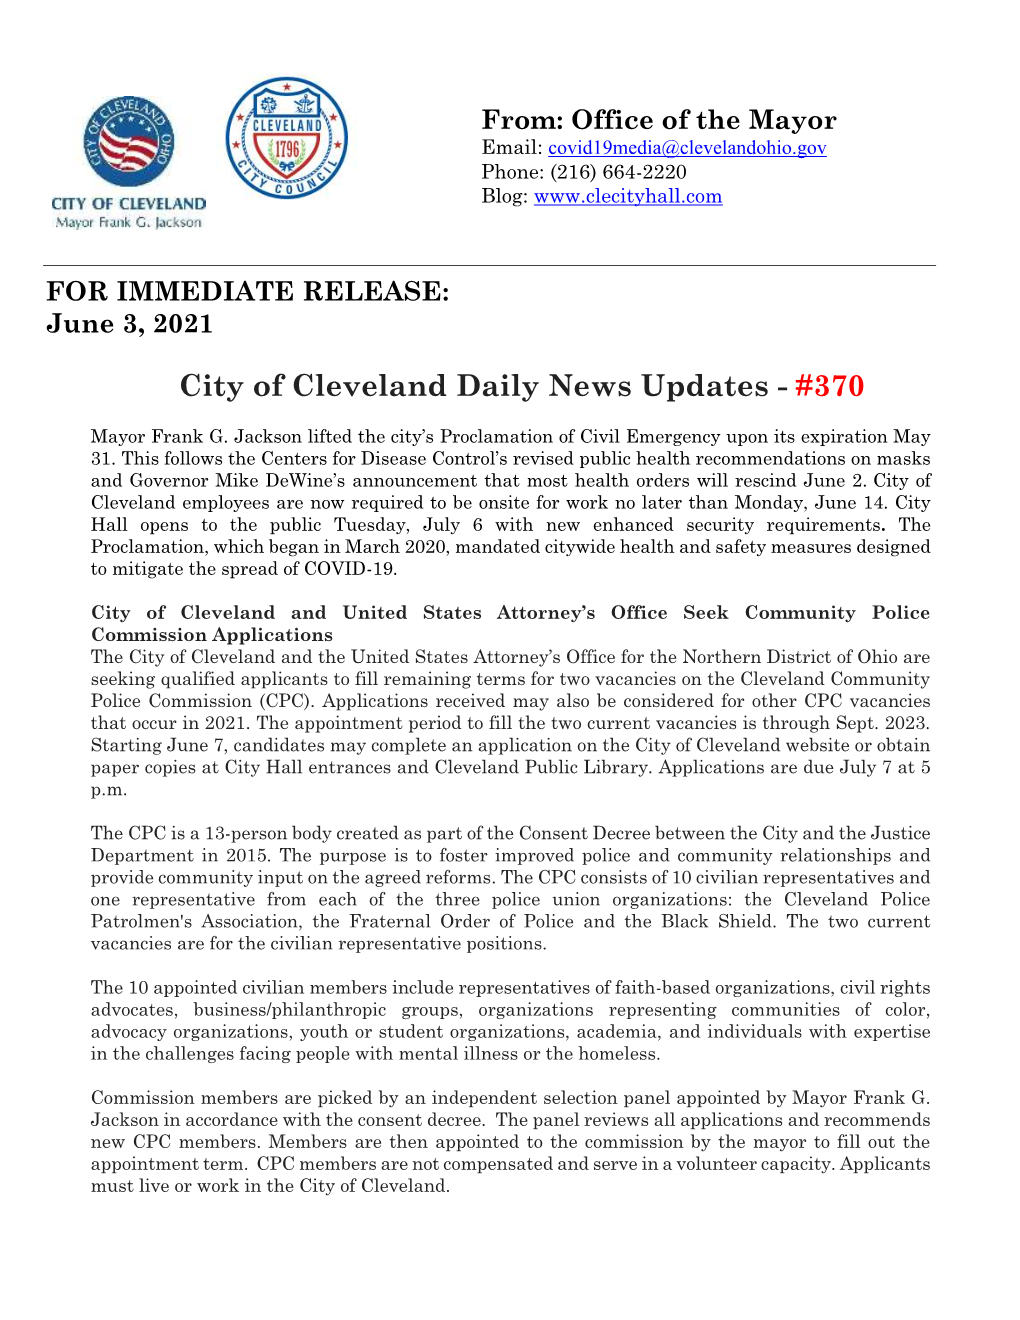 City of Cleveland Daily News Updates - #370